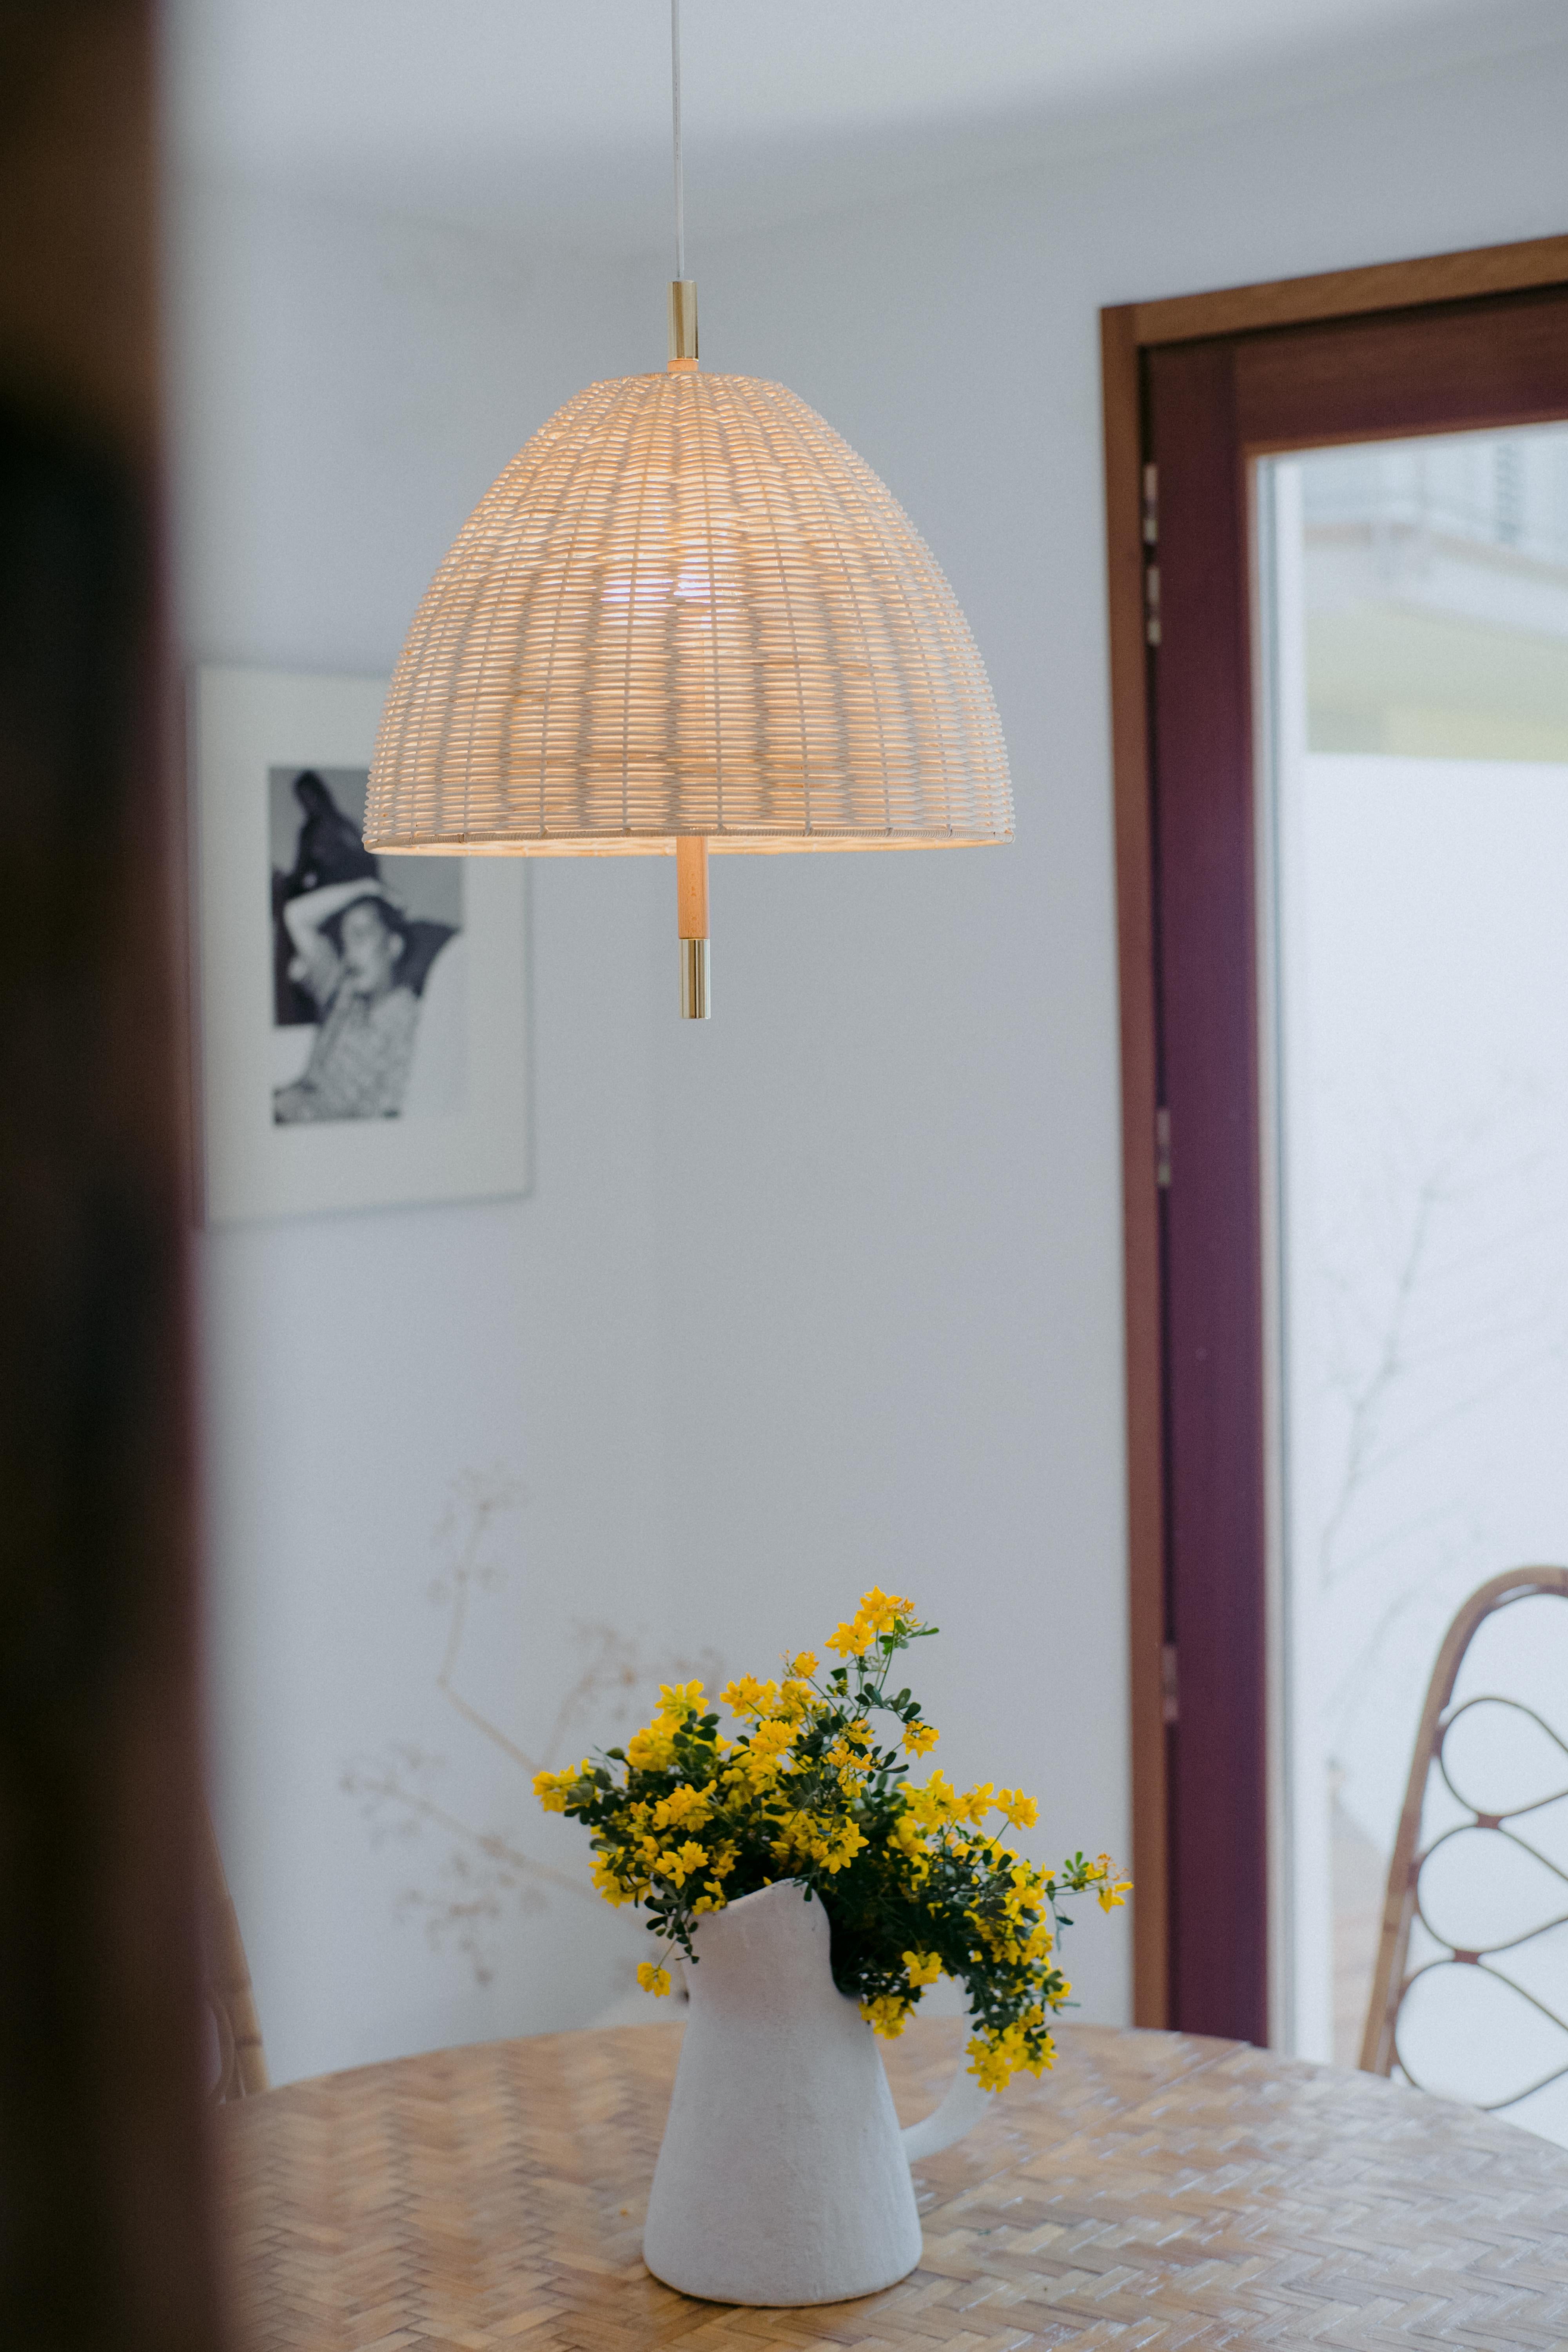 AMÀ - Pendant suspendend lamp

Amà , comes from the Catalan '' a mà '', which means '' handmade '', and it is how this contemporary lamp is made. With hand-turned beech wood, solid brass details, and hand-woven lampshade in natural